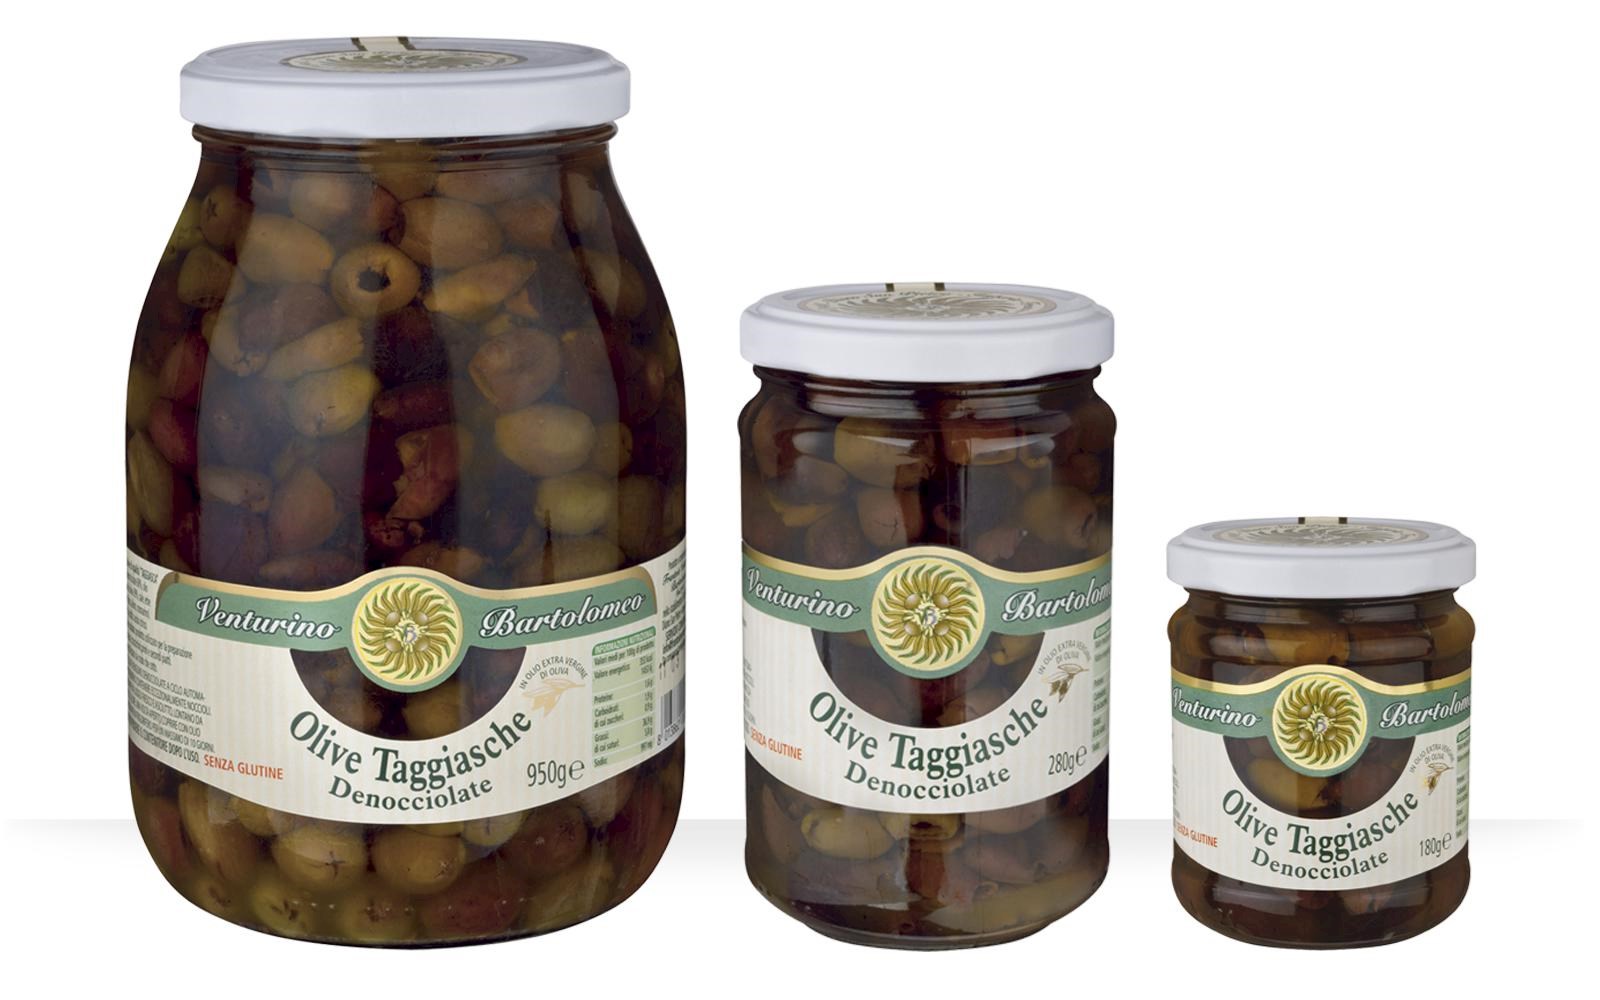 Pitted Taggiasca Olives in Extra Virgin Olive Oil from Liguria